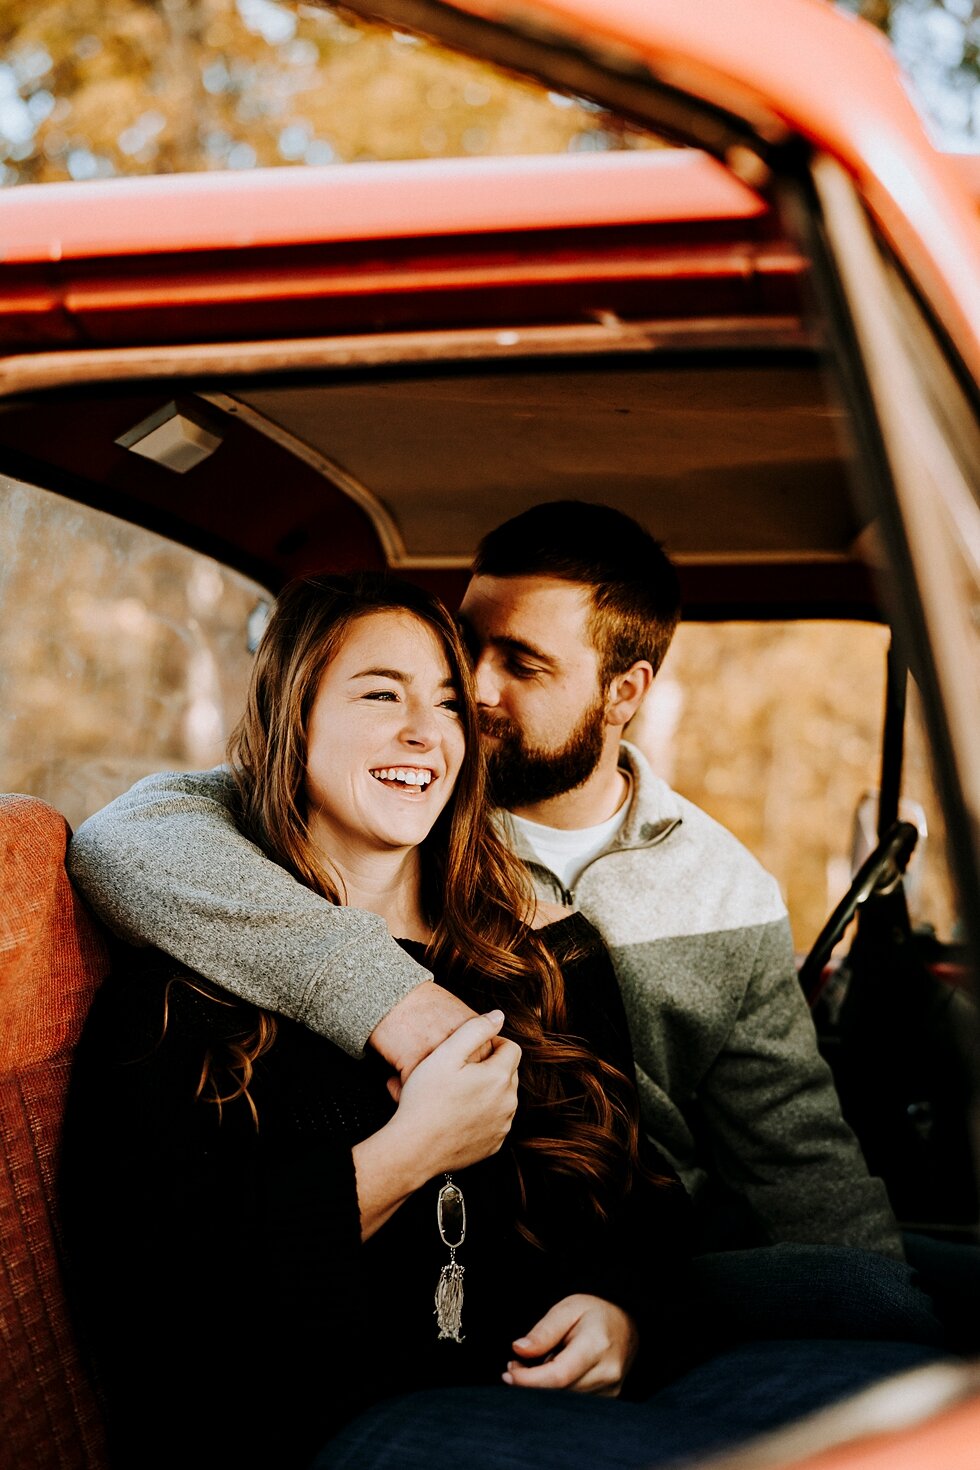  Engagement photos in the cab of the truck they plan to use as their getaway car after they say “I do.” #engagementgoals #engagementphotographer #engaged #outdoorengagement #kentuckyphotographer #indianaphotographer #louisvillephotographer #engagemen